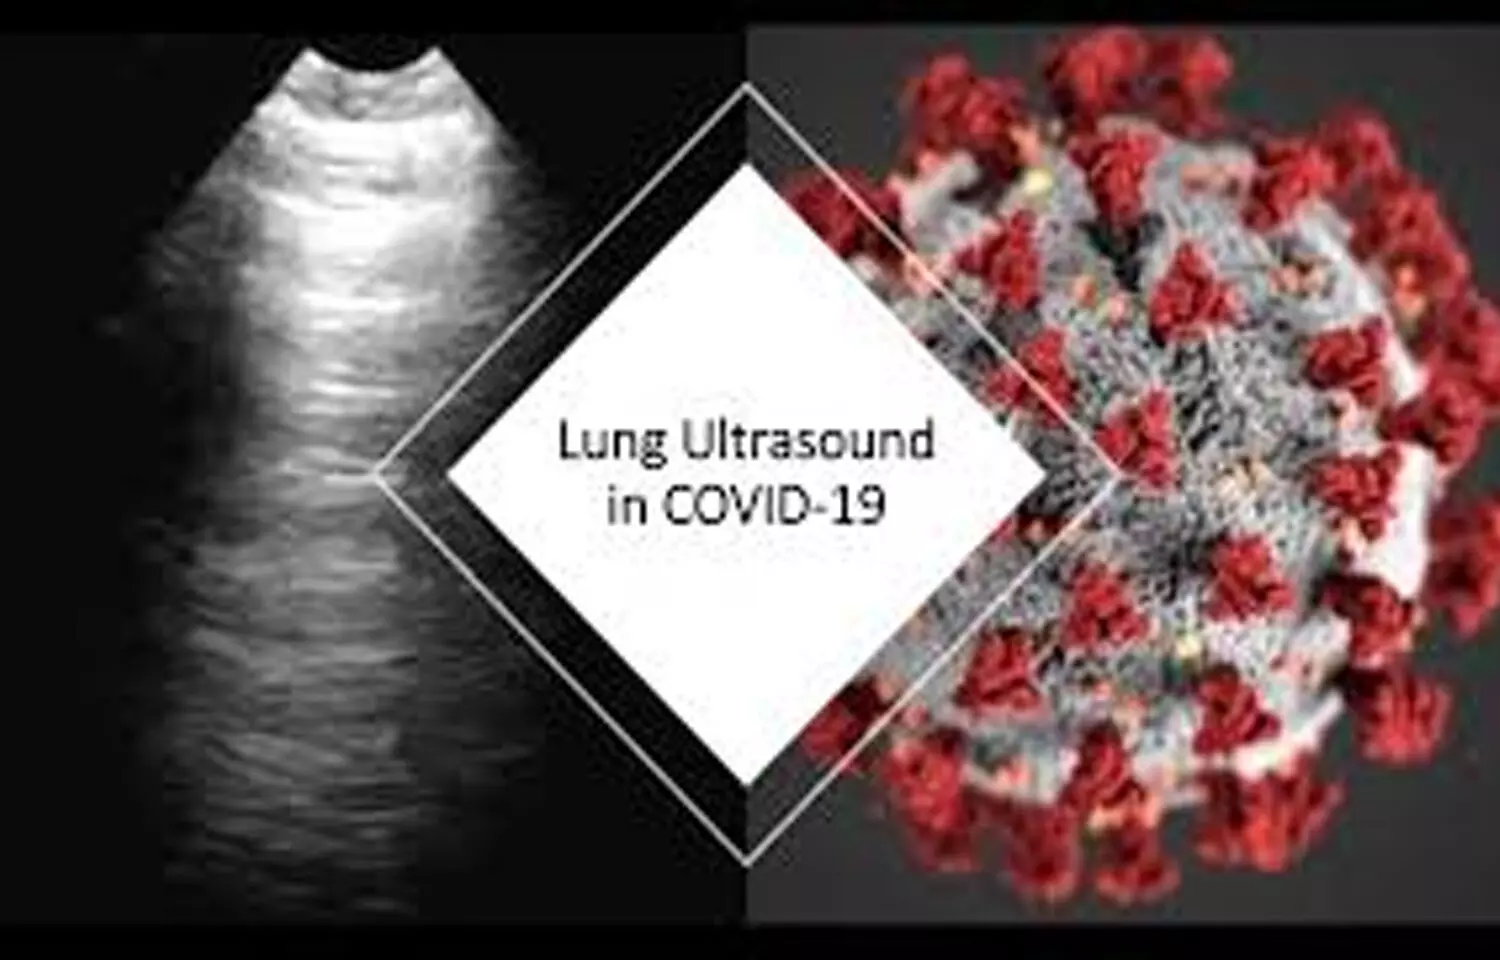 Lung ultrasound with patientscharacteristics can accurately identify COVID-19 pneumonia